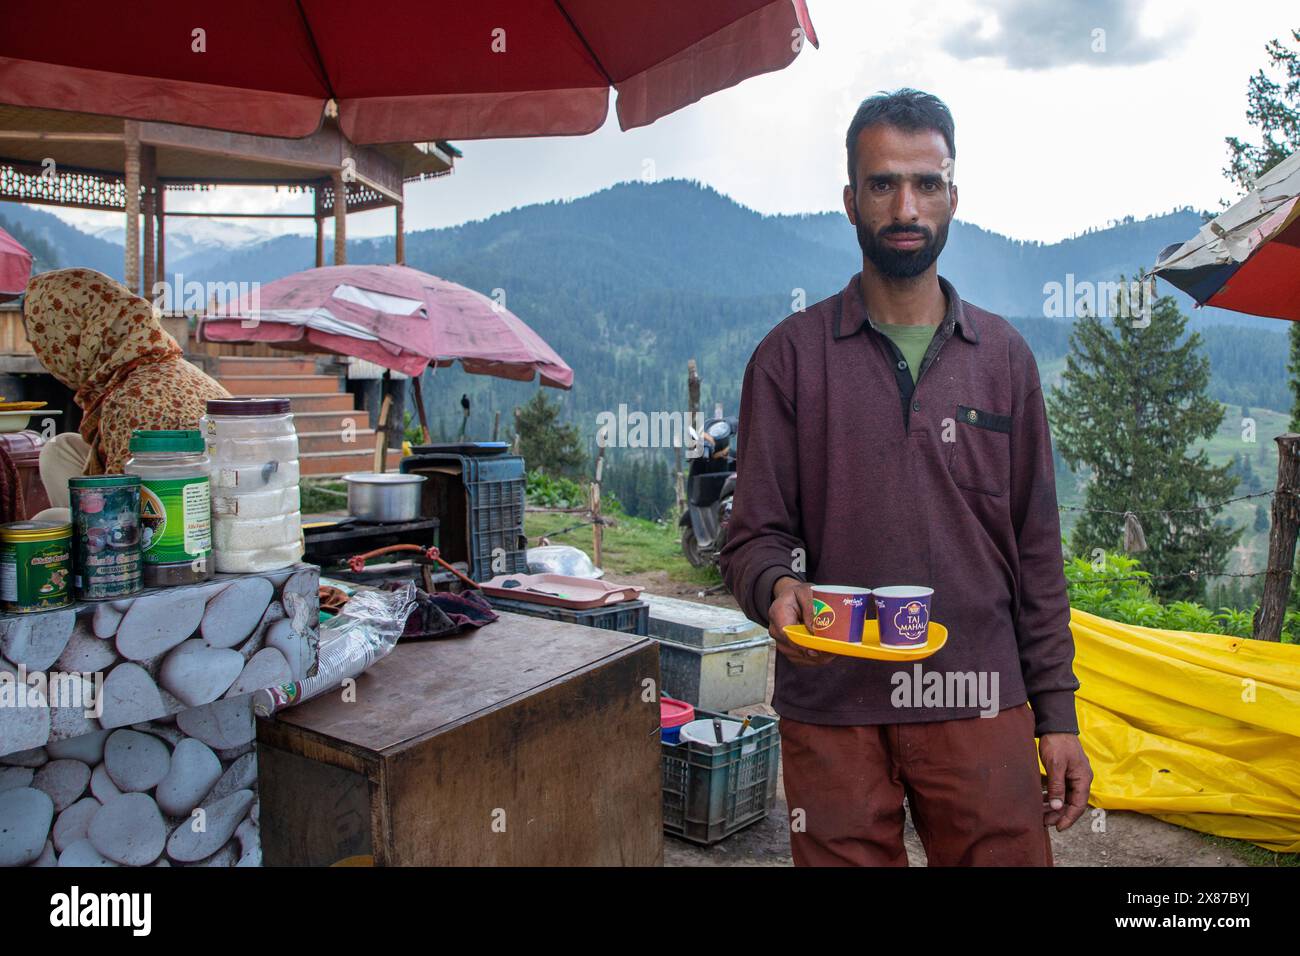 May 23, 2024, Doodhpathri, Jammu And Kashmir, India: A Kashmir man serves Noon Chai (salted tea) to the tourists and locals passing by his roadside stall along the Doodhpathri road in Budgam district, south-west of Srinagar. The authorities have asked the owners of tea vendors to vacate the space they have occupied ''illegally'' within ten days or face action. The officials told a local news agency that the tourism development authority has received multiple complaints that the tea stall owners have been cutting tree branches, thereby harming the picturesque meadows. On the way to the meadows Stock Photo